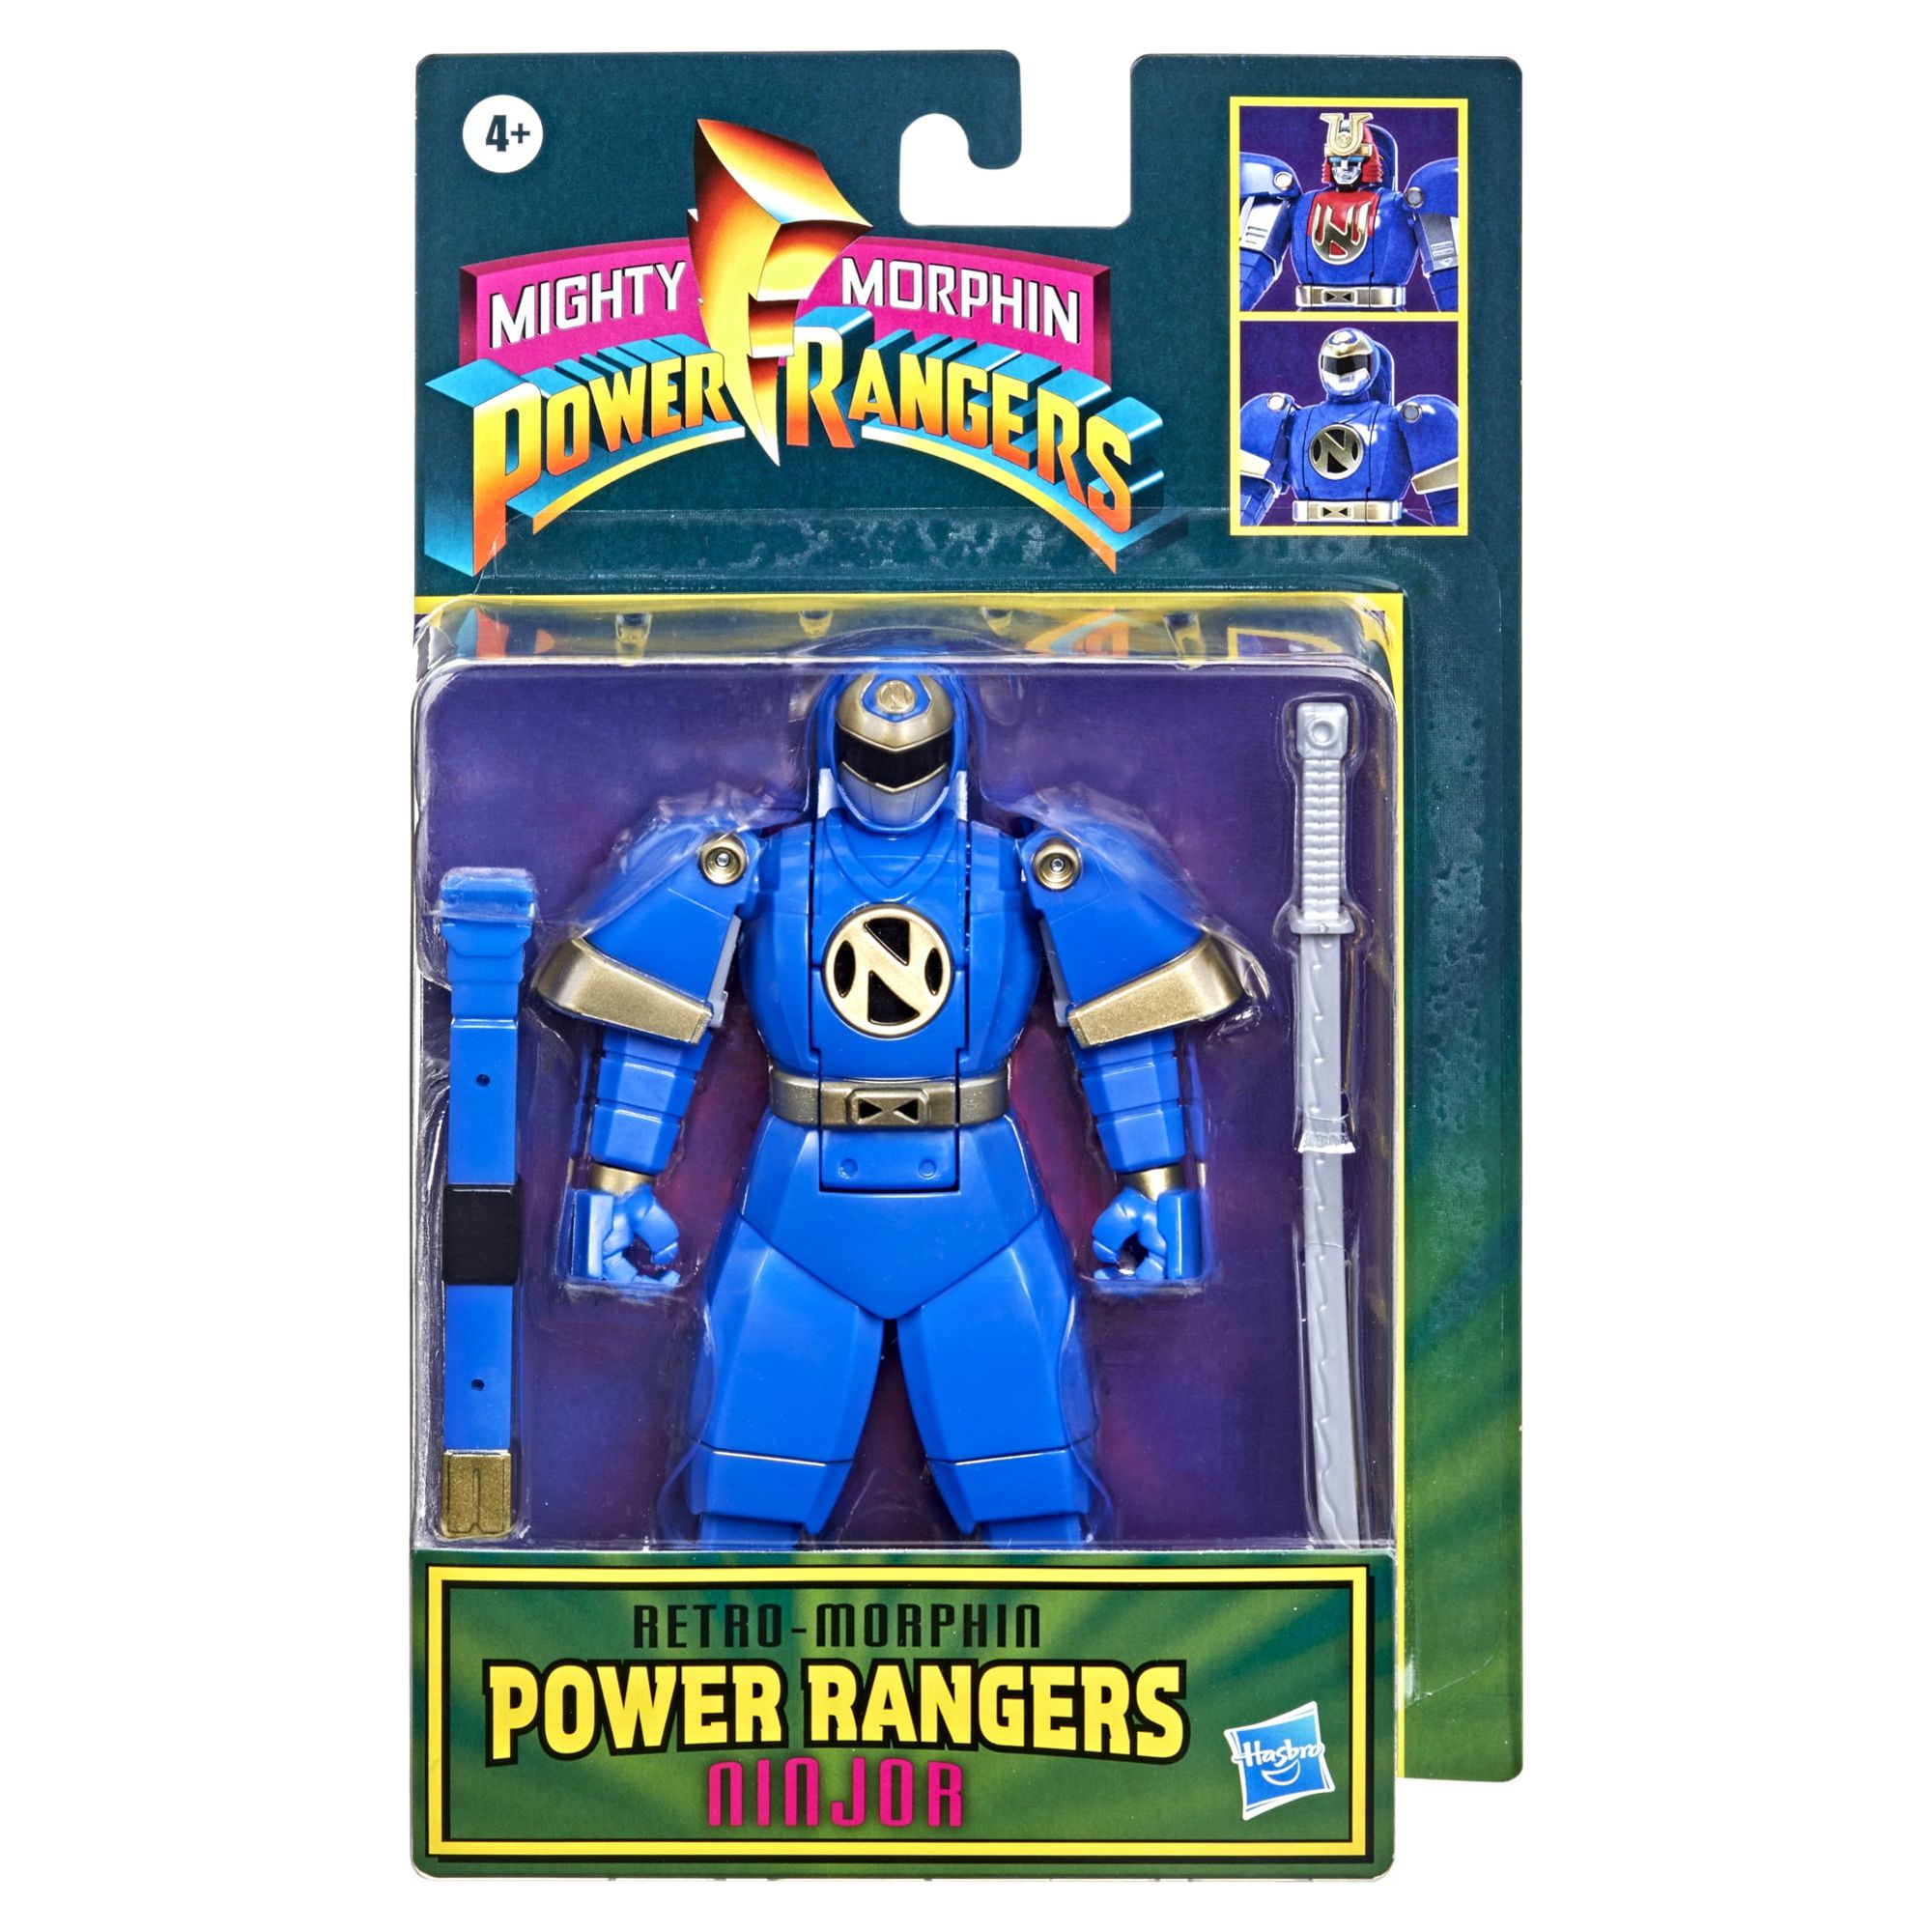 Power Rangers: Mighty Morphin Retro-Morphin Ninjor Toy Action Figure for Boys and Girls Ages 4 5 6 7 8 and Up (6”) - image 1 of 4